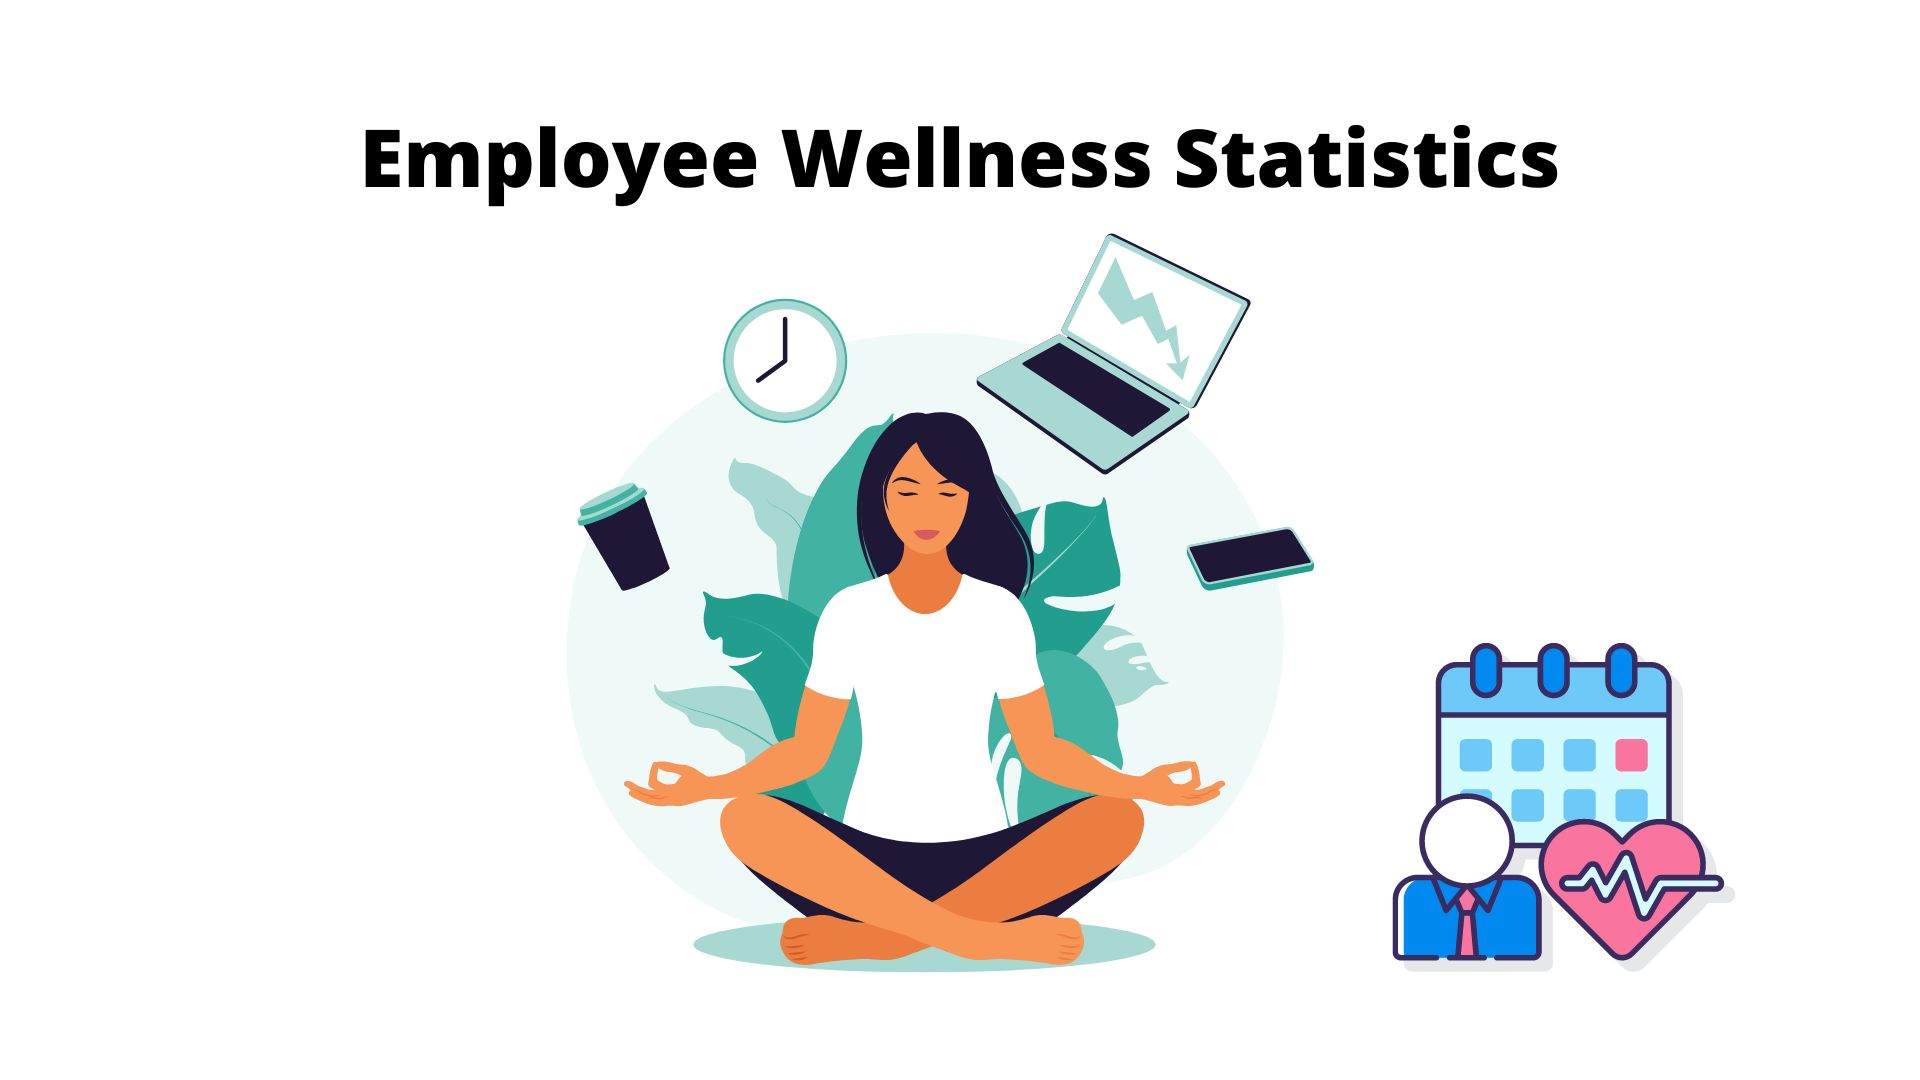 25+ Employee Wellness Statistics For 2023 – See How Workplace Wellness Programs Are Improving!